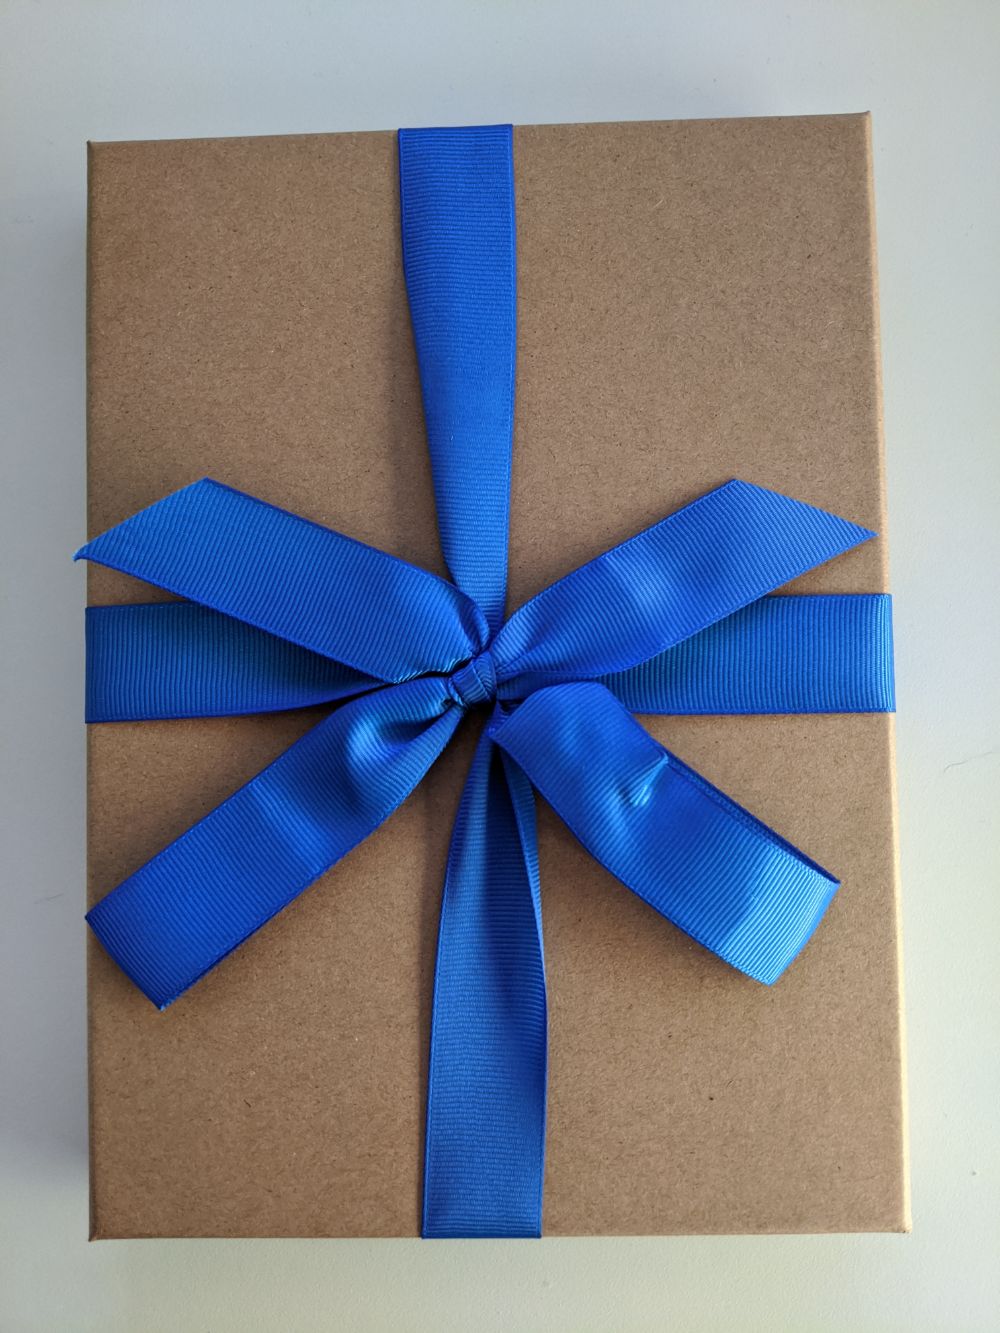 A brown parcel, wrapped with a blue bow. The parcel itself is quite weighty